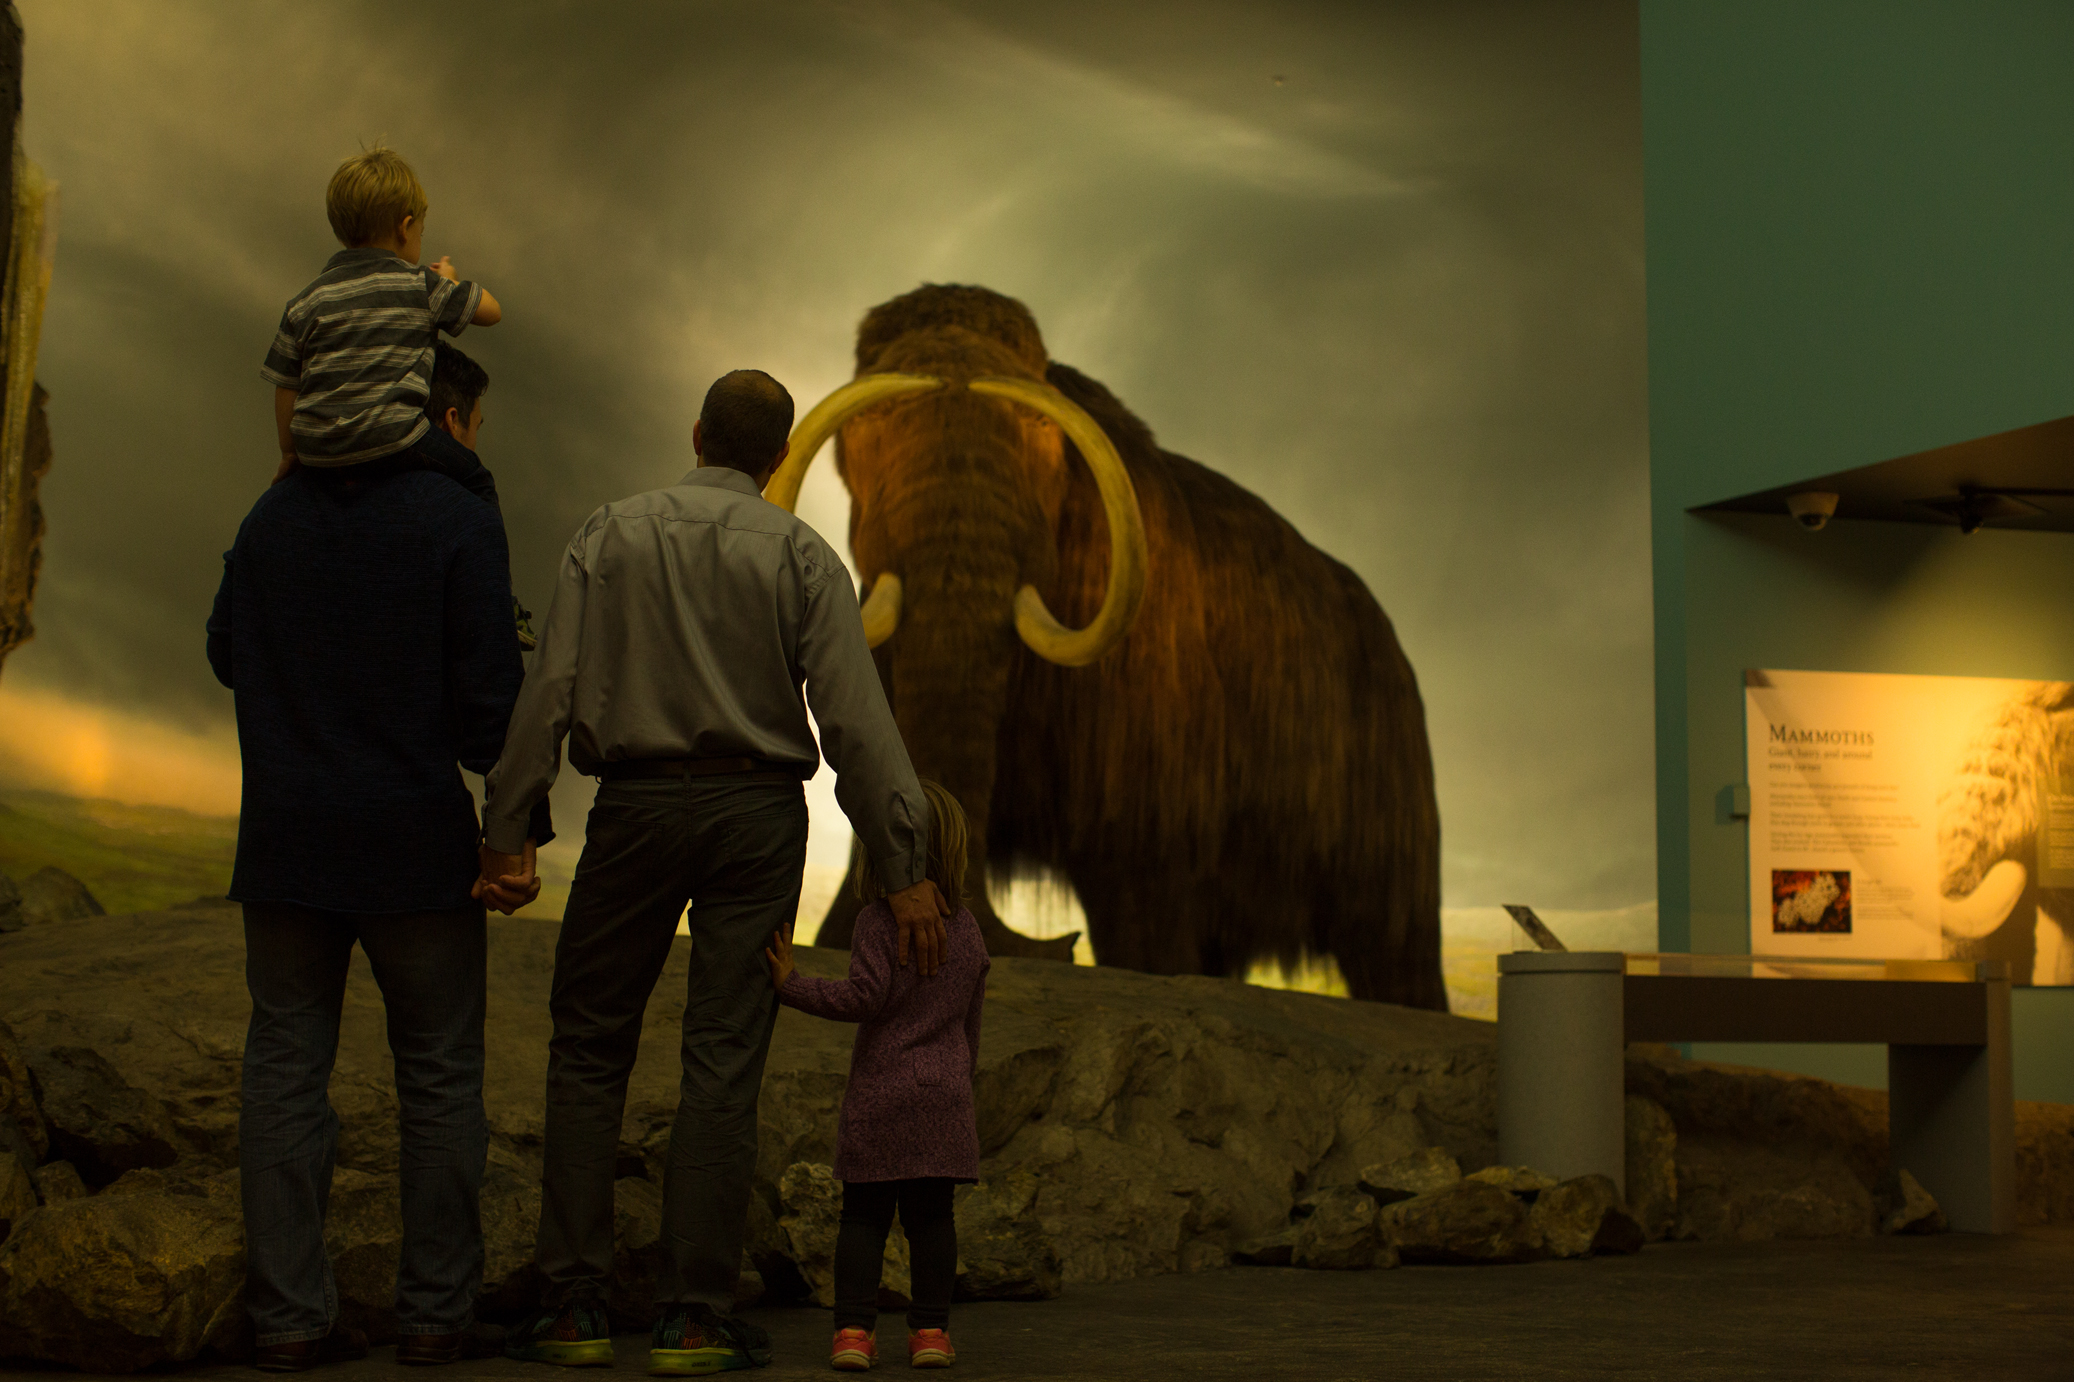 Young family admires wooly the mammoth at the Royal BC Museum